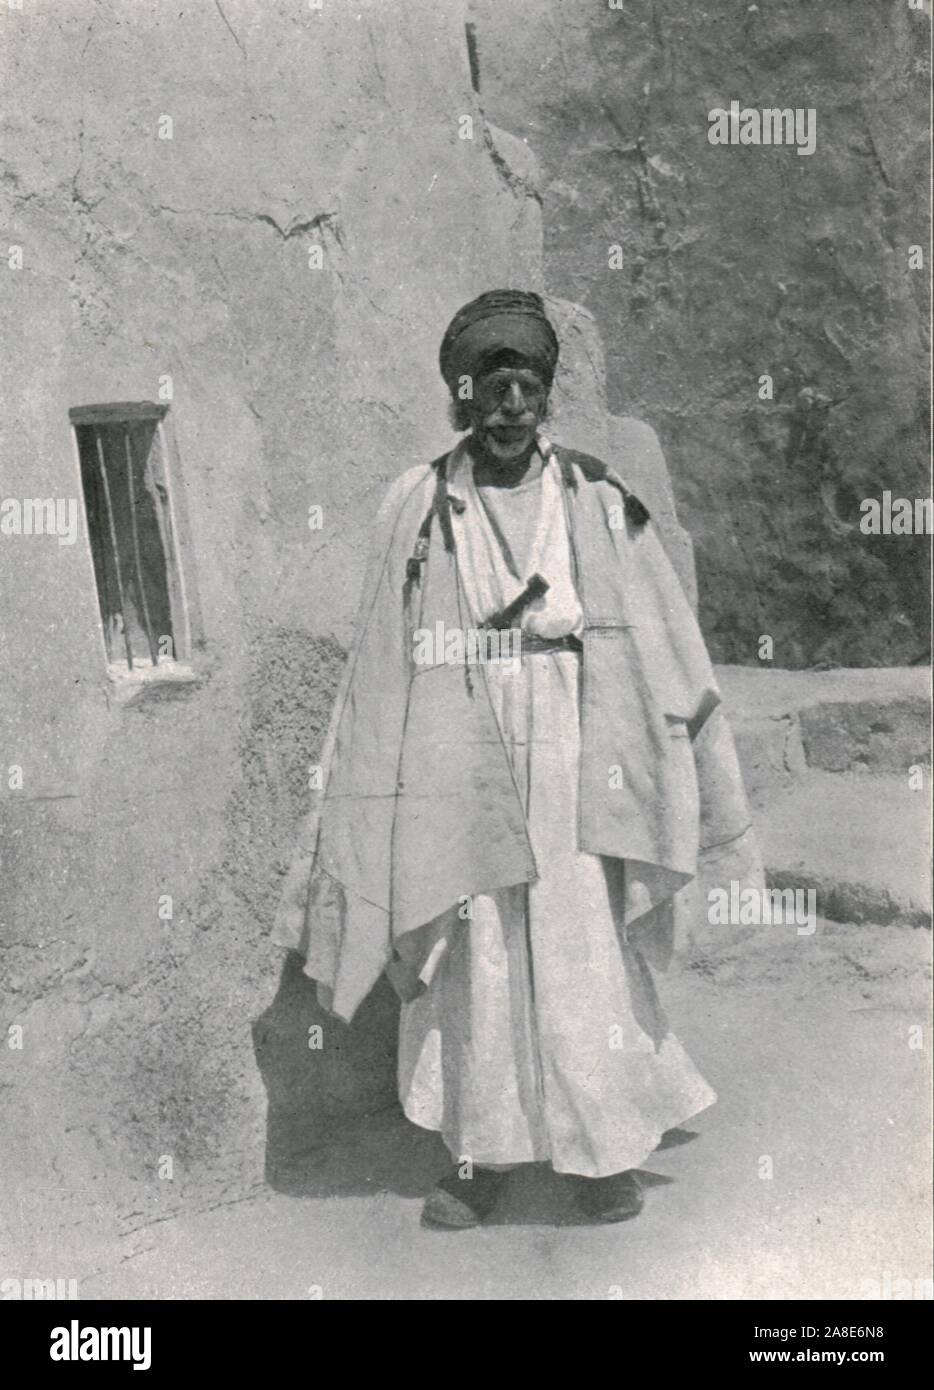 'Yezidi Shaykh of Sinjar', c1906-1913, (1915). Yazidi (or Yezidi) sheikh from Sinjar, (northern Iraq). From &quot;The Caliphs' Last Heritage, a short history of the Turkish Empire&quot; by Lt.-Col. Sir Mark Sykes. [Macmillan &amp; Co, London, 1915] Stock Photo